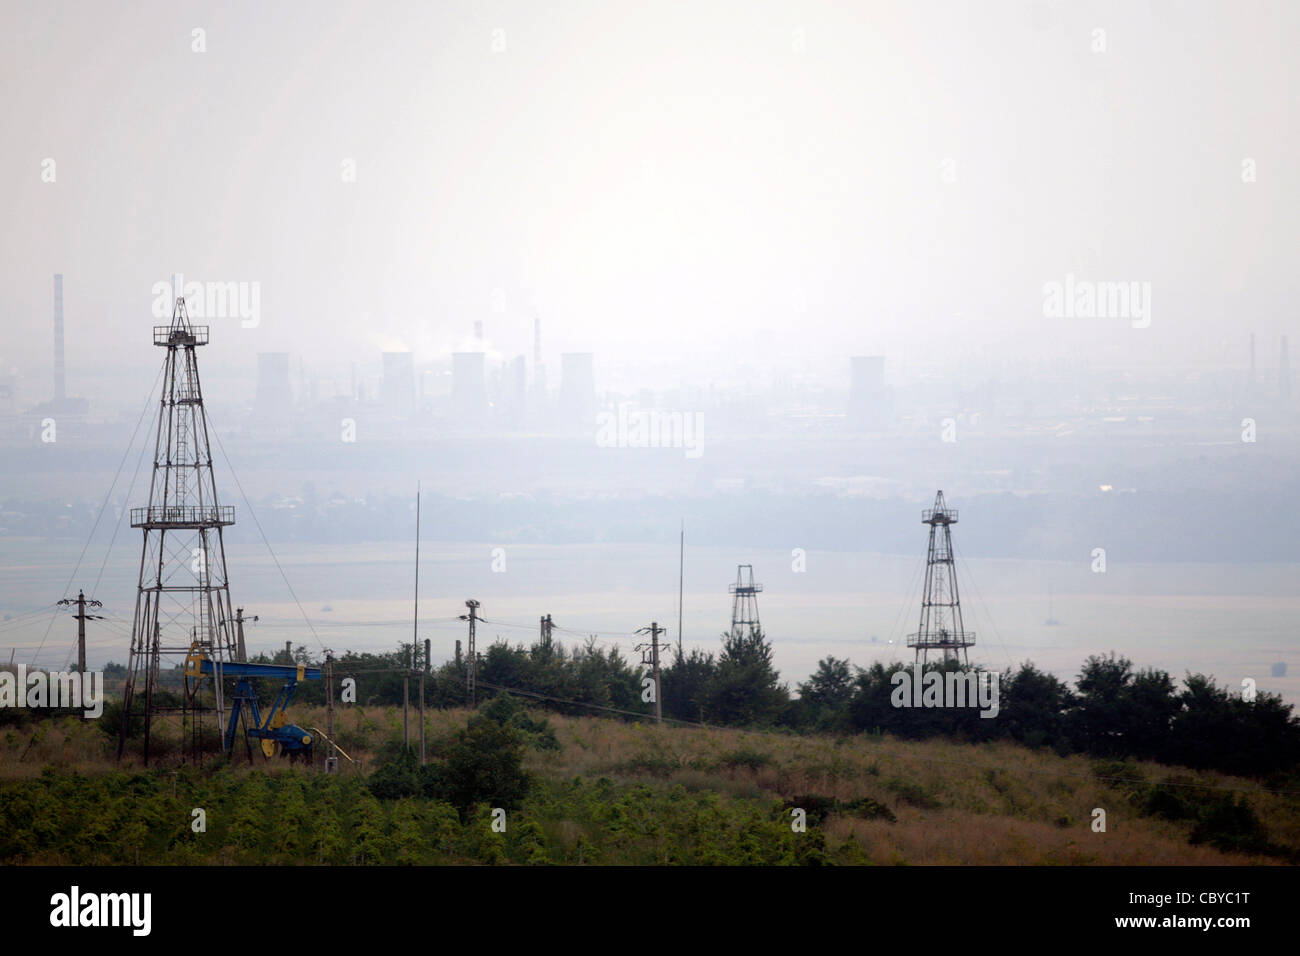 Oil field with oil pumps on a hazy day Stock Photo